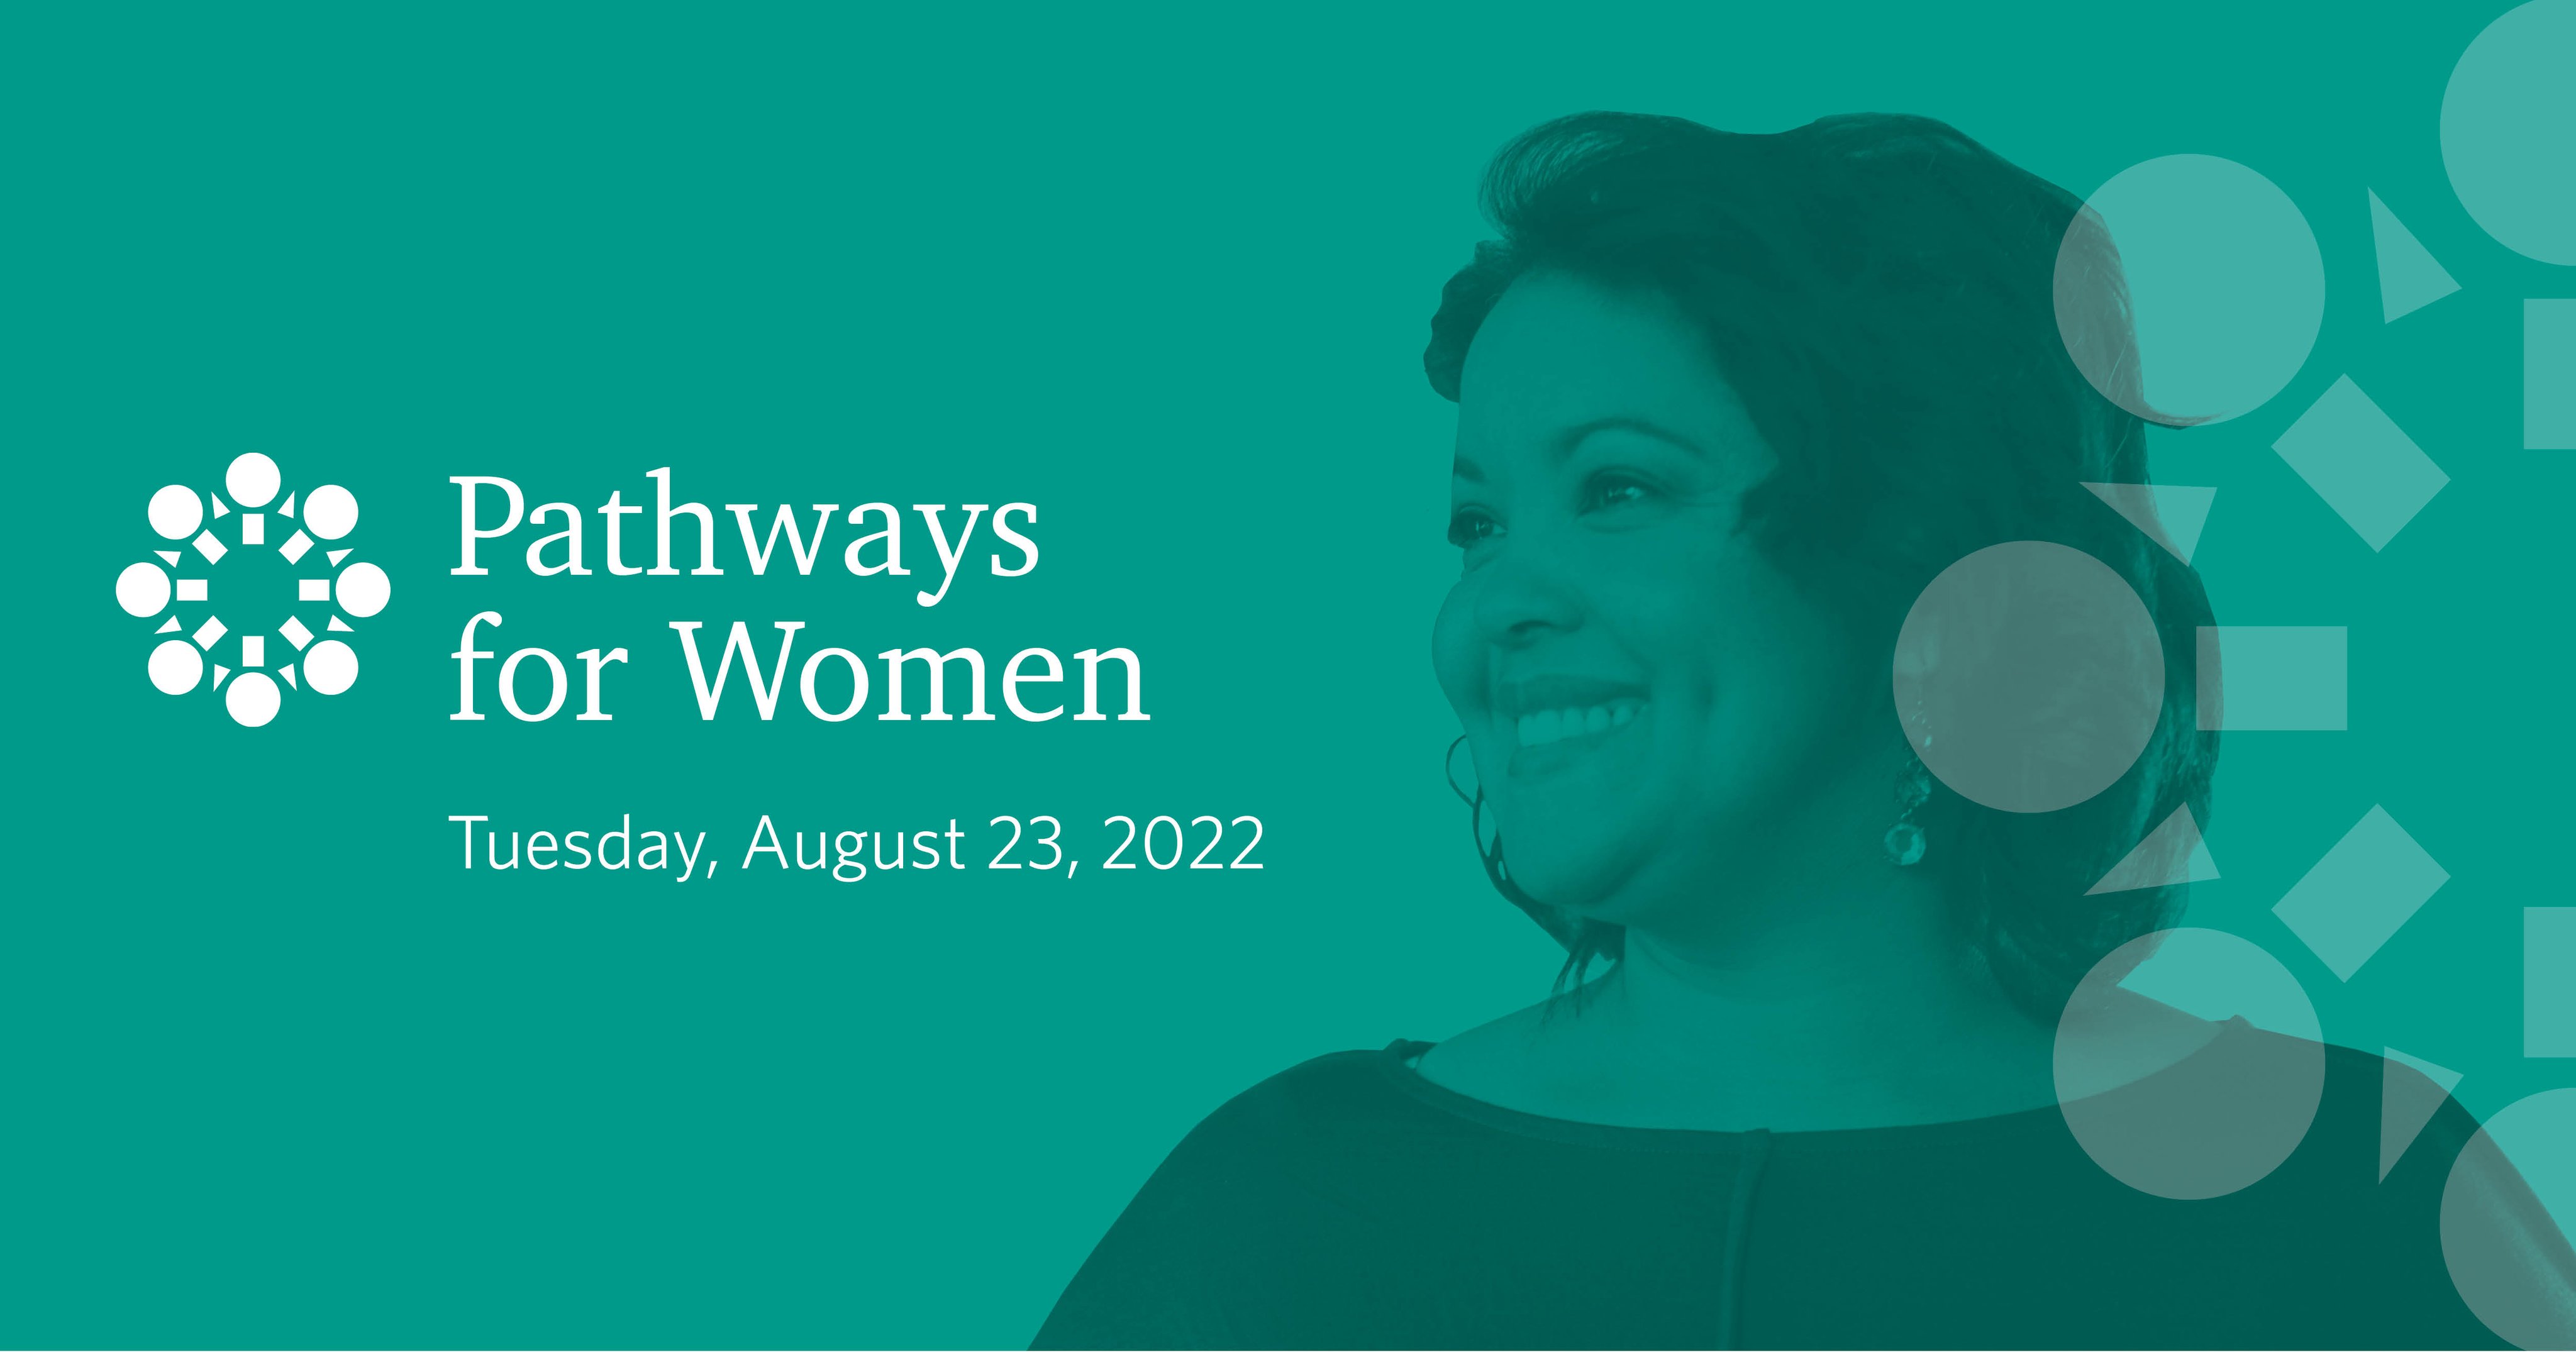 CalPERS on Twitter "Join us this summer for Pathways for Women Aug